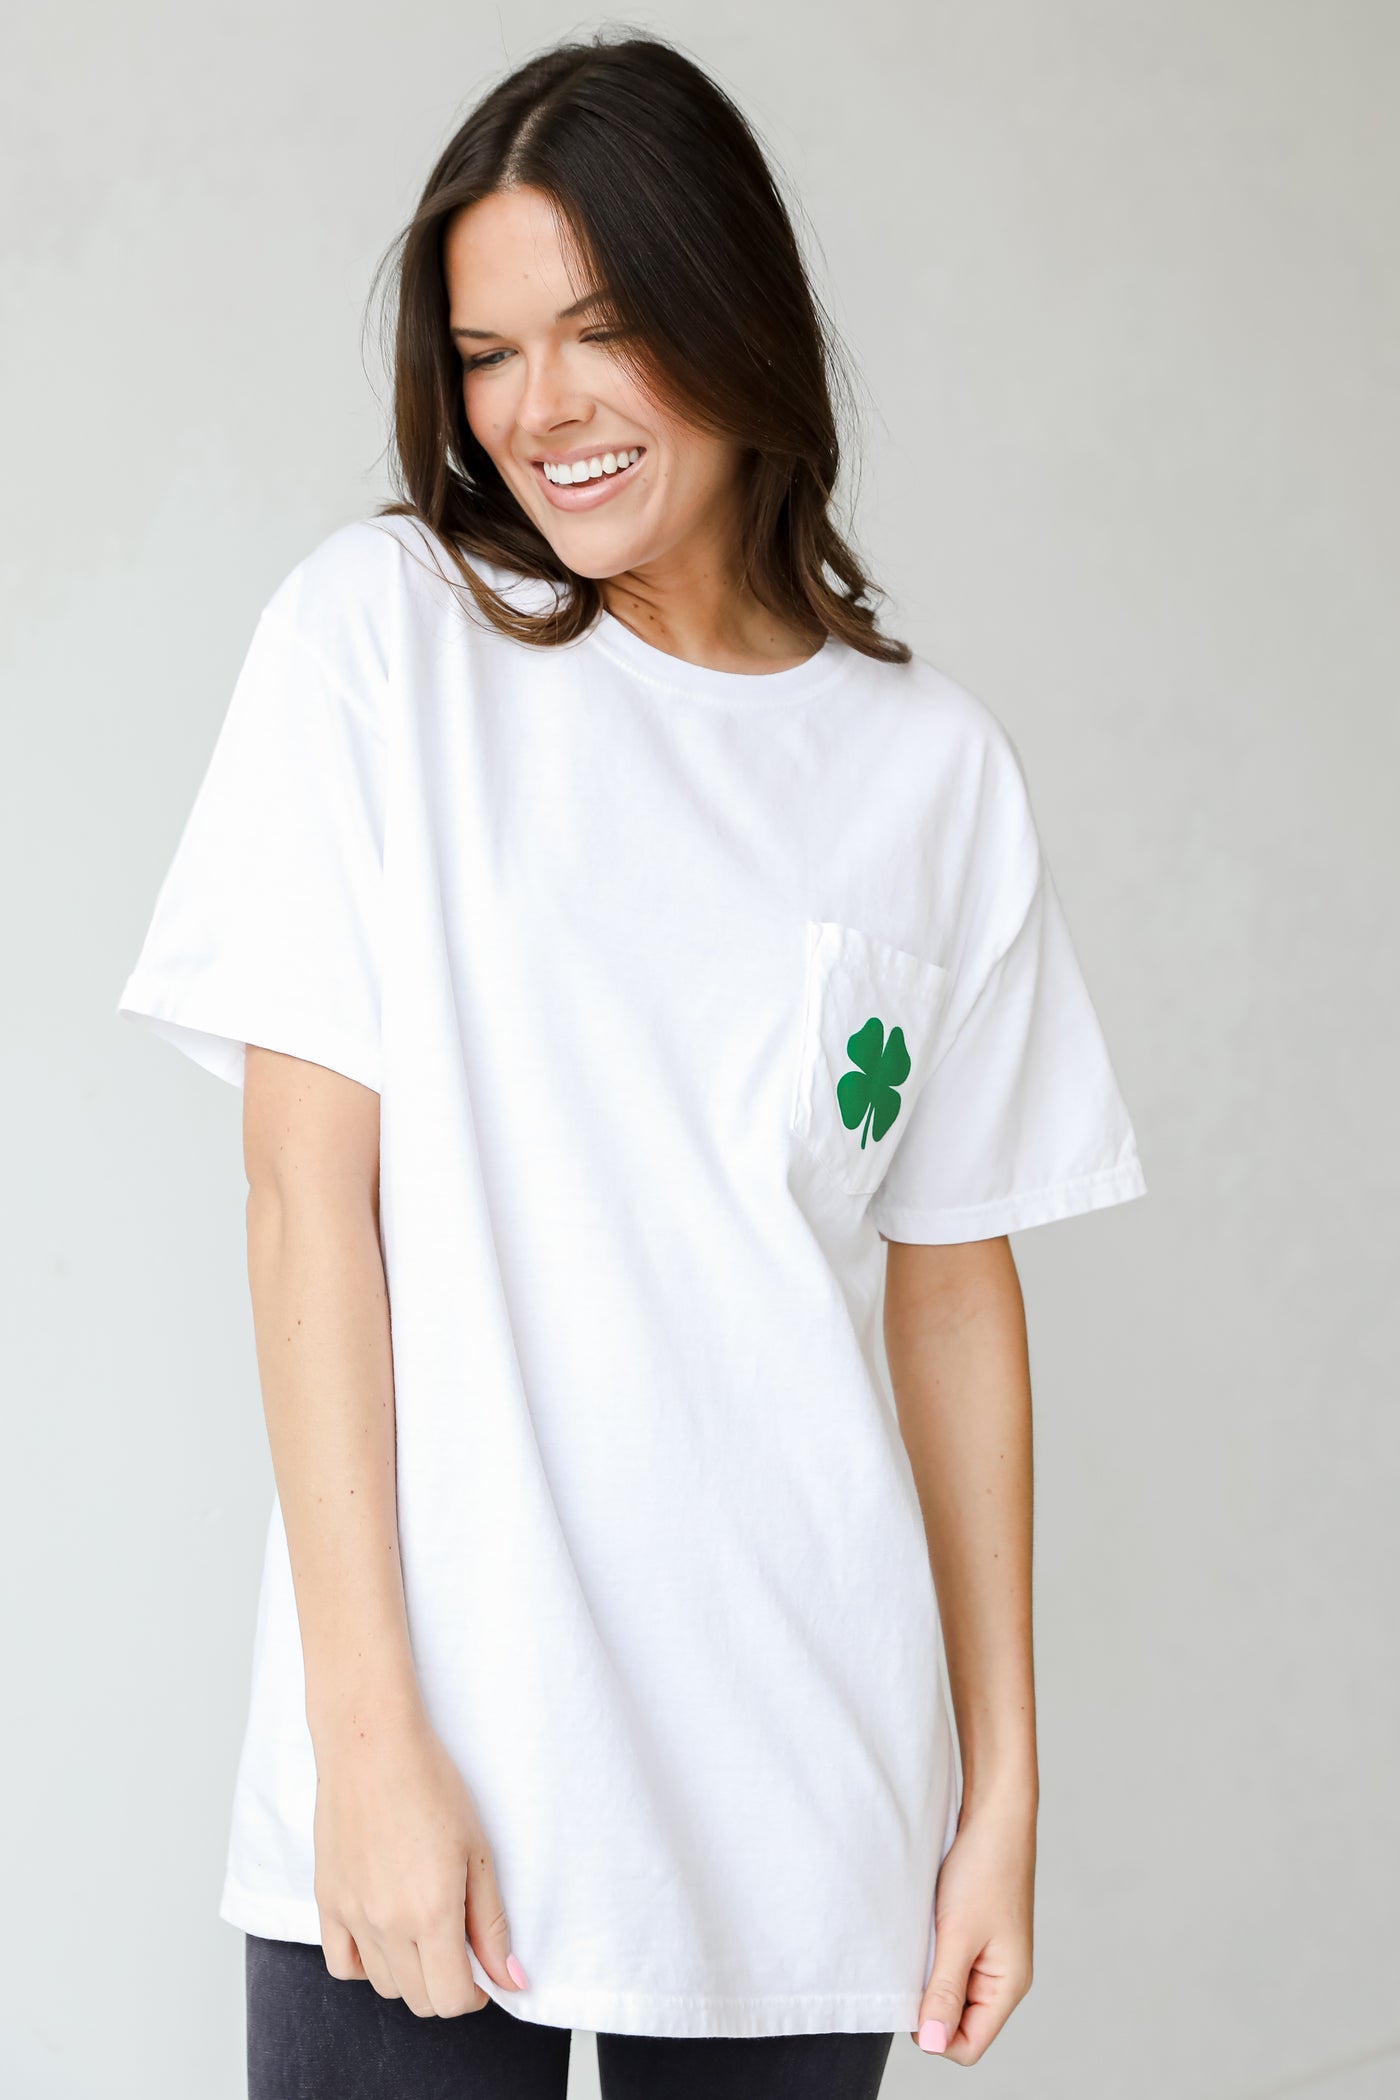 Feeling Lucky Clover Tee front view